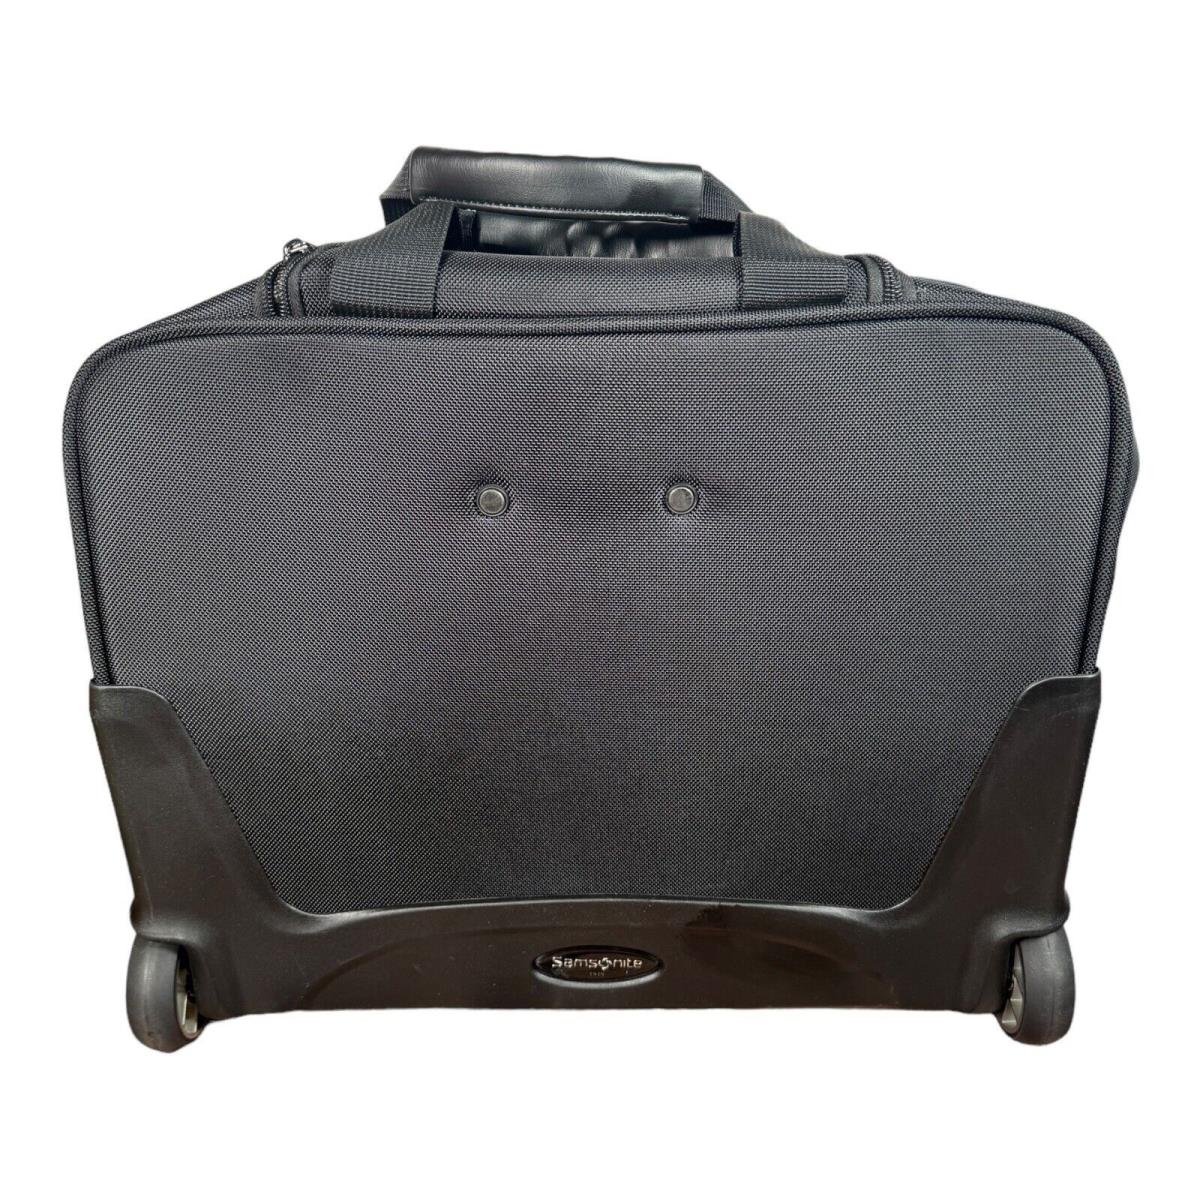 Samsonite Wheeled Business Case up to 17.3 in Laptop Black